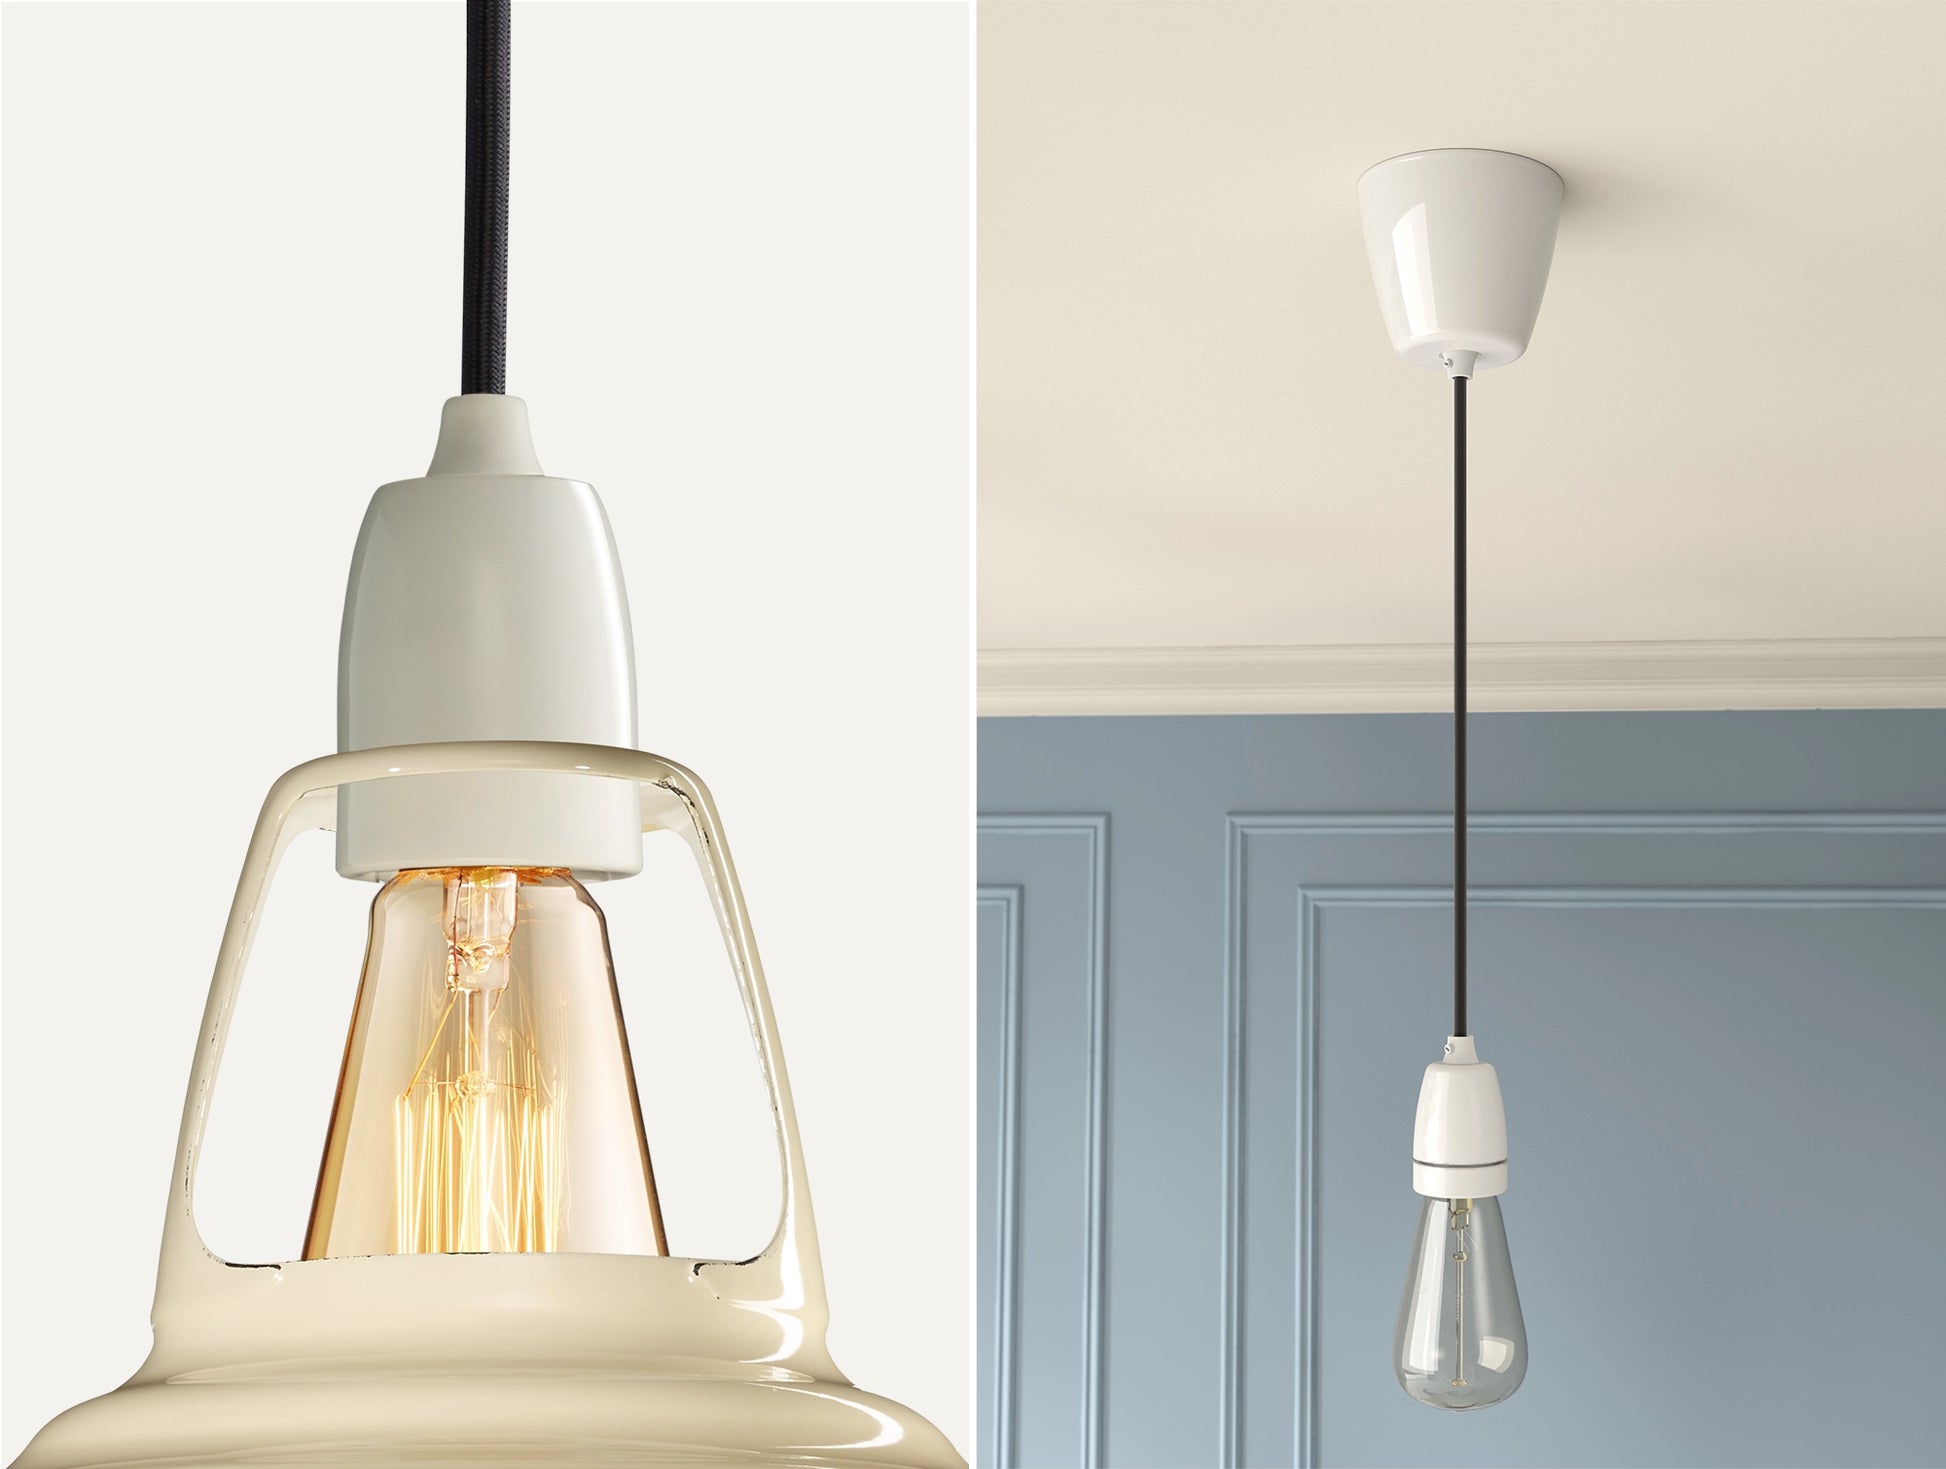 Close up of an E27 Porcelain suspension set on a Paper Cream lampshade on the left. On the right, an E27 Porcelain pendant set with a lightbulb is hanging from the ceiling